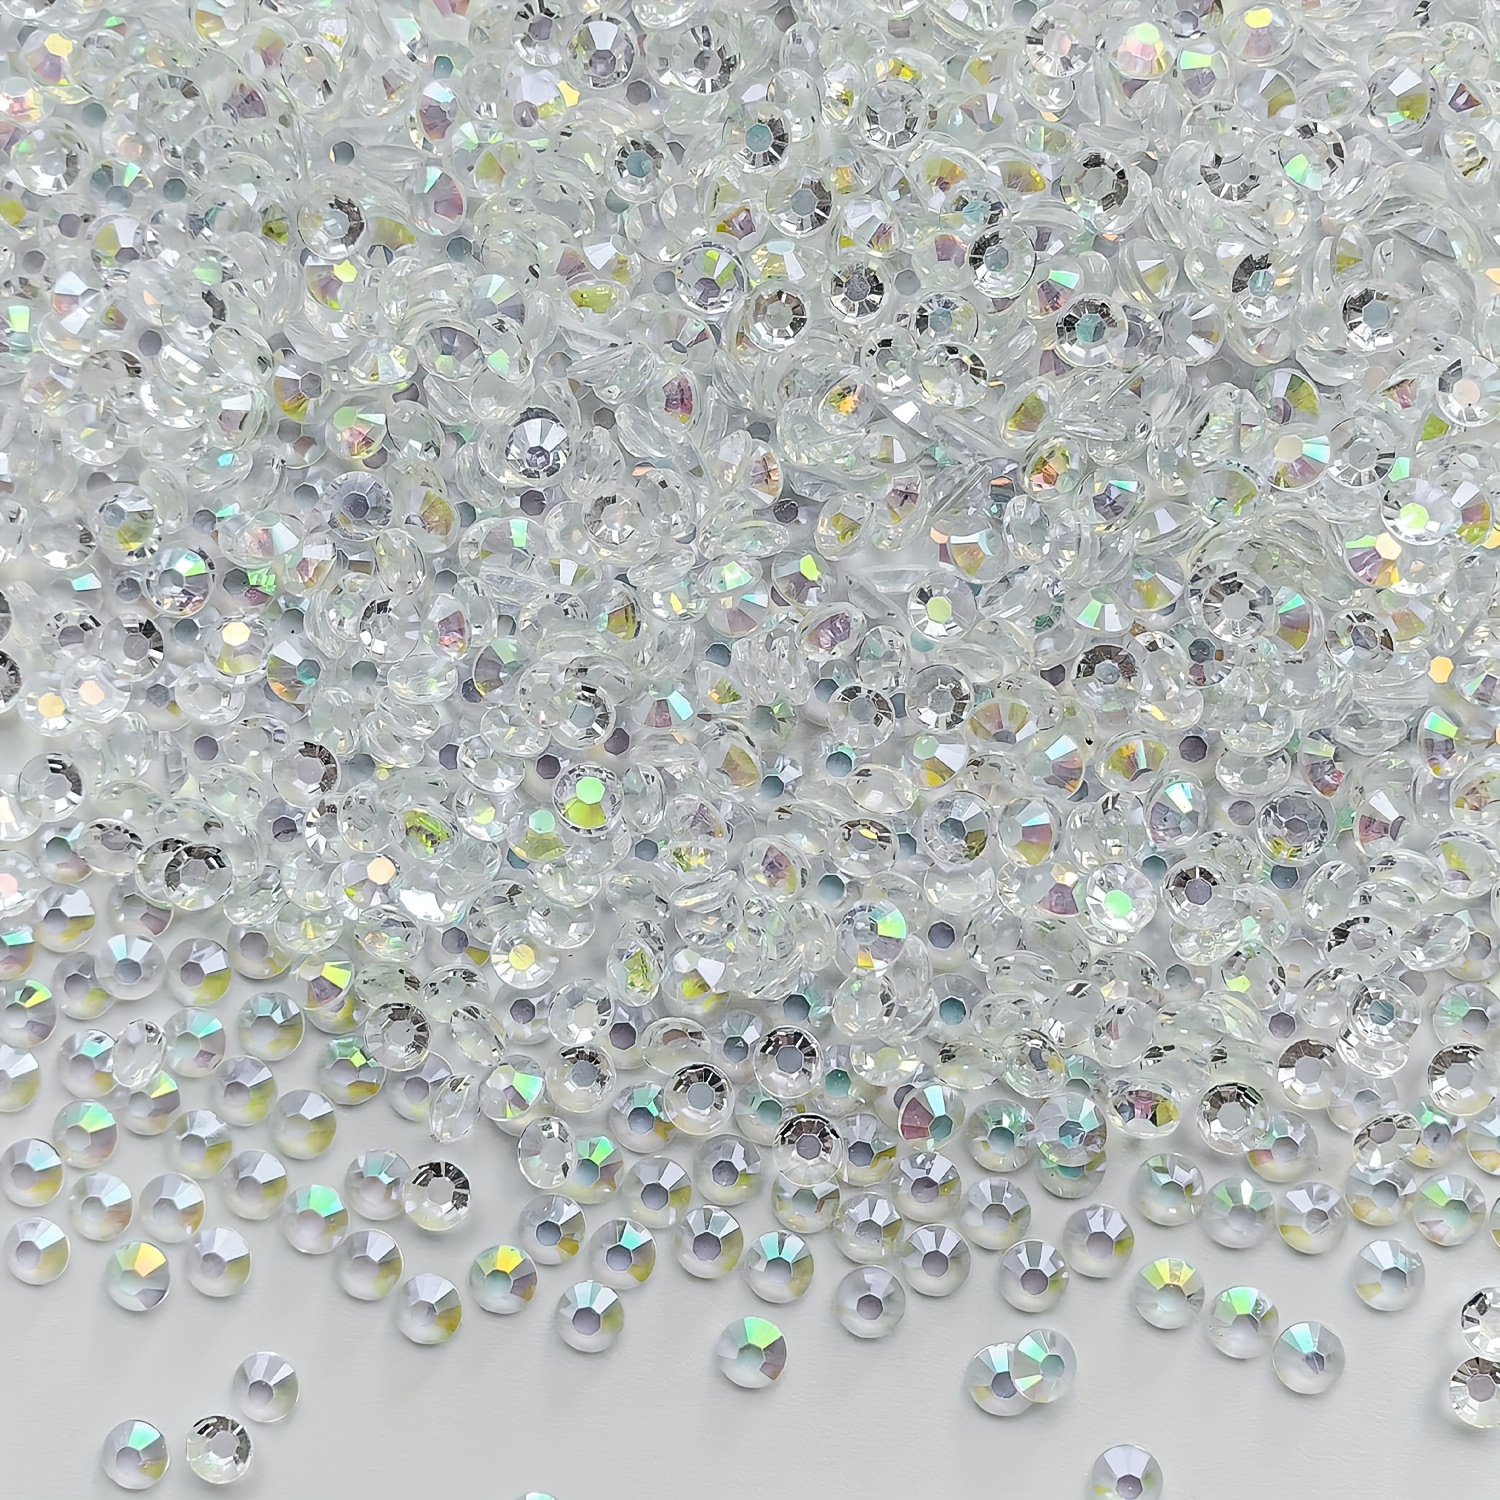  450 pcs 2mm - 6mm Resin Clear Crystal Round Rhinestones  Flatback Mix Size ~ M1-23 [by Zealer]